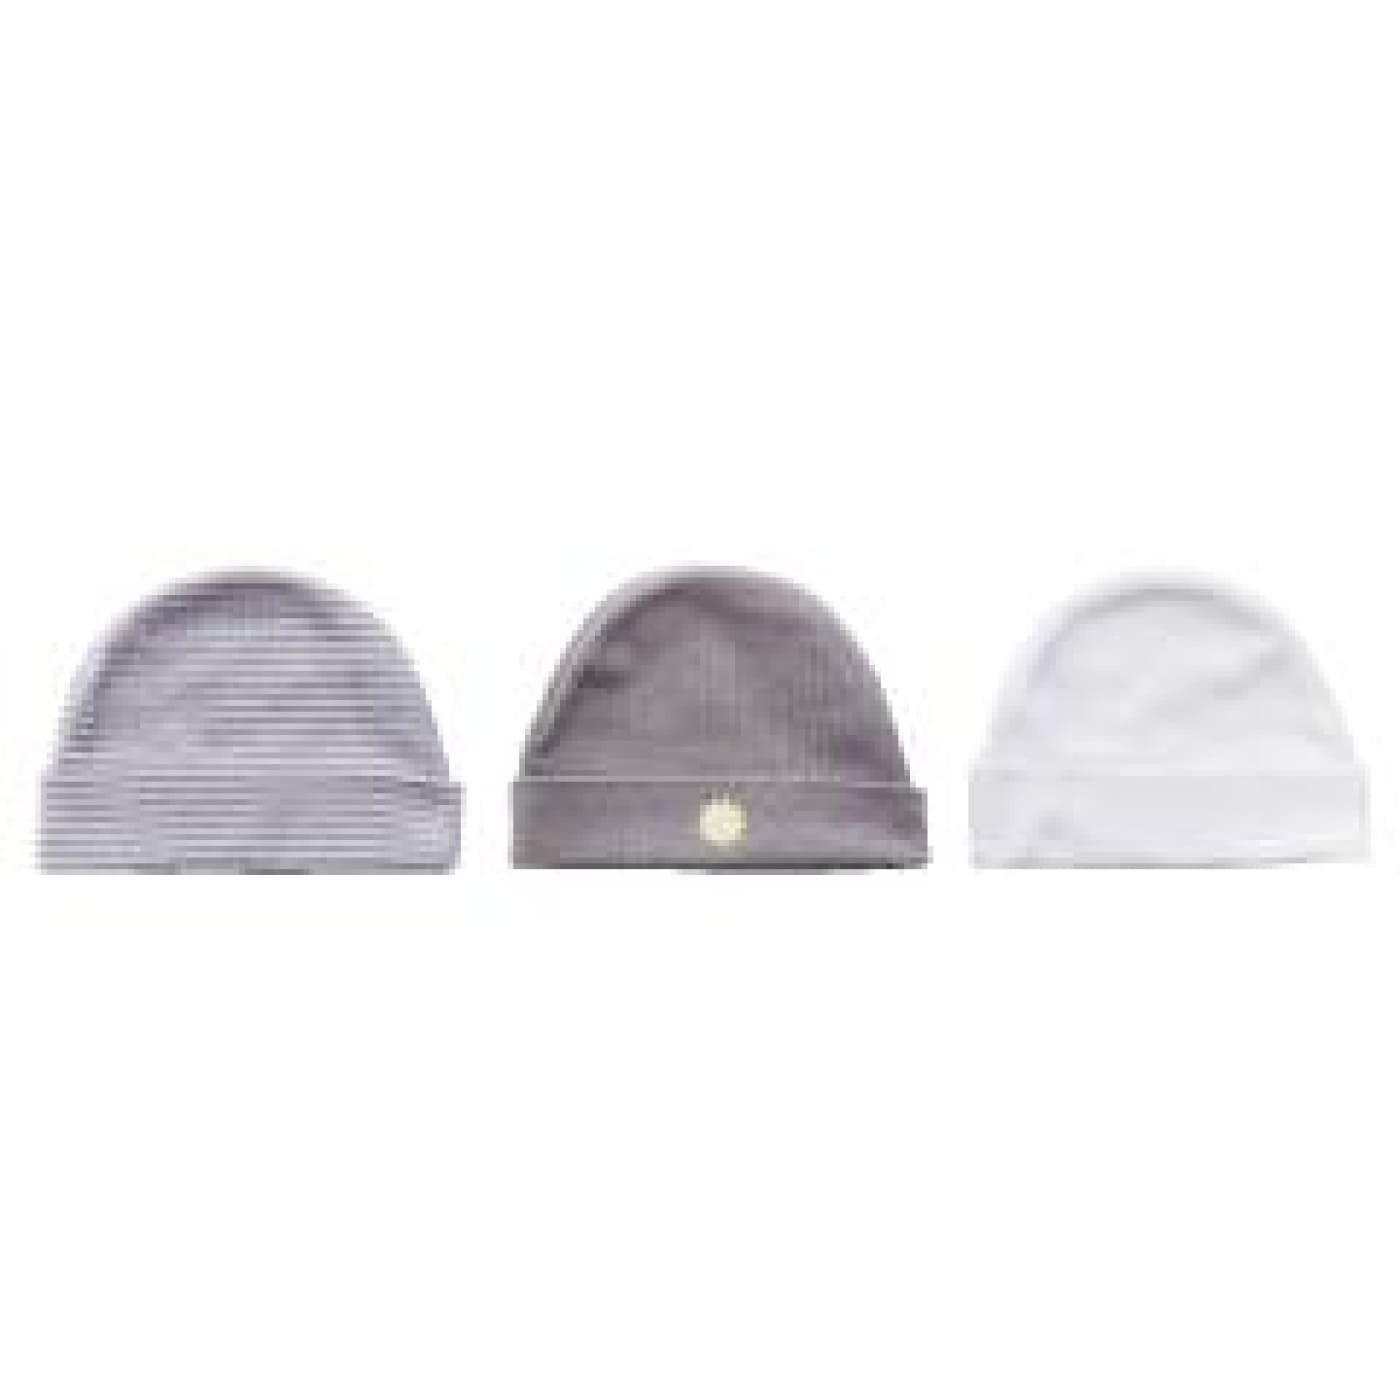 Playette 3pp Newborn Knitted Cap GREY - BABY & TODDLER CLOTHING - MITTENS/SOCKS/SHOES